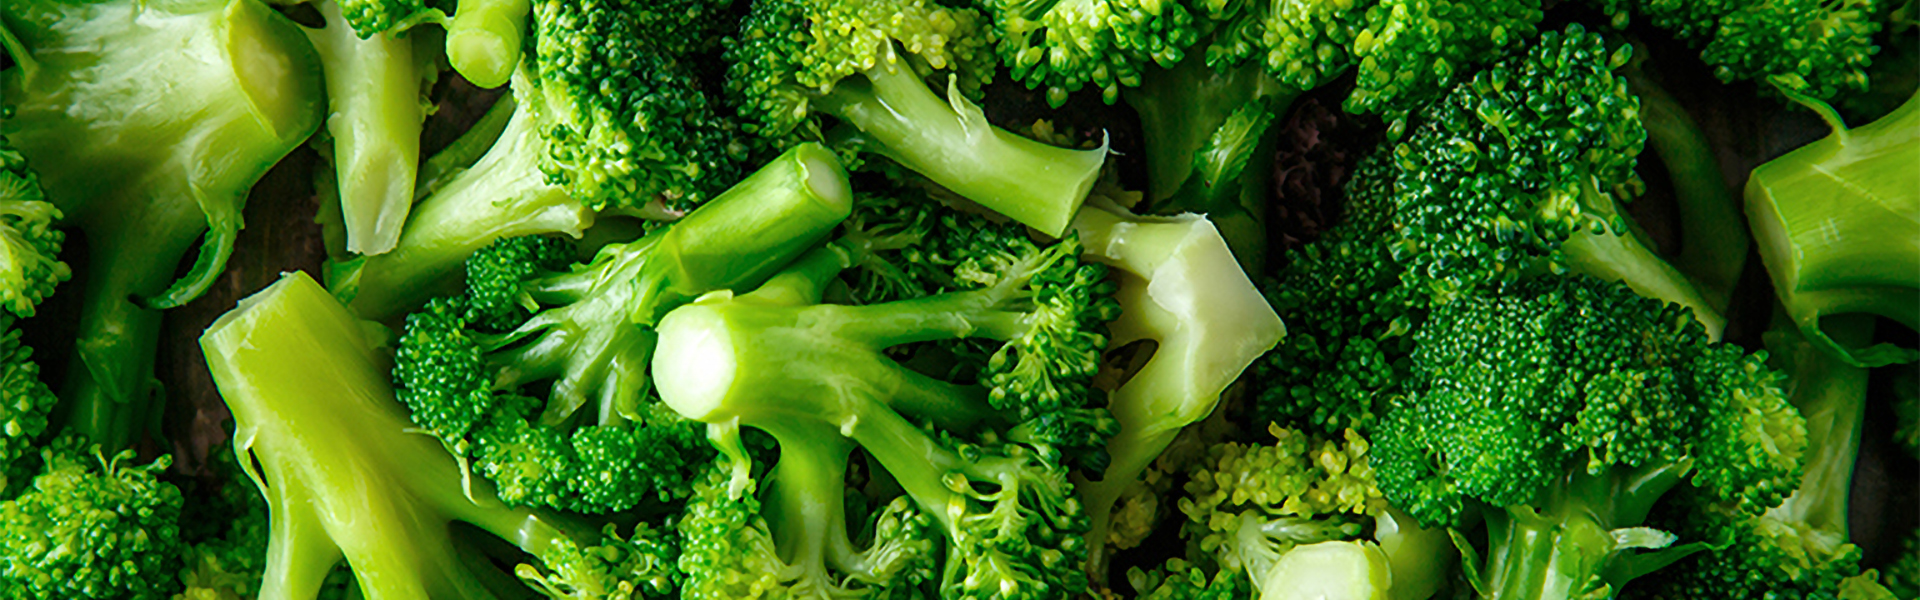 Know Your Food: Broccoli